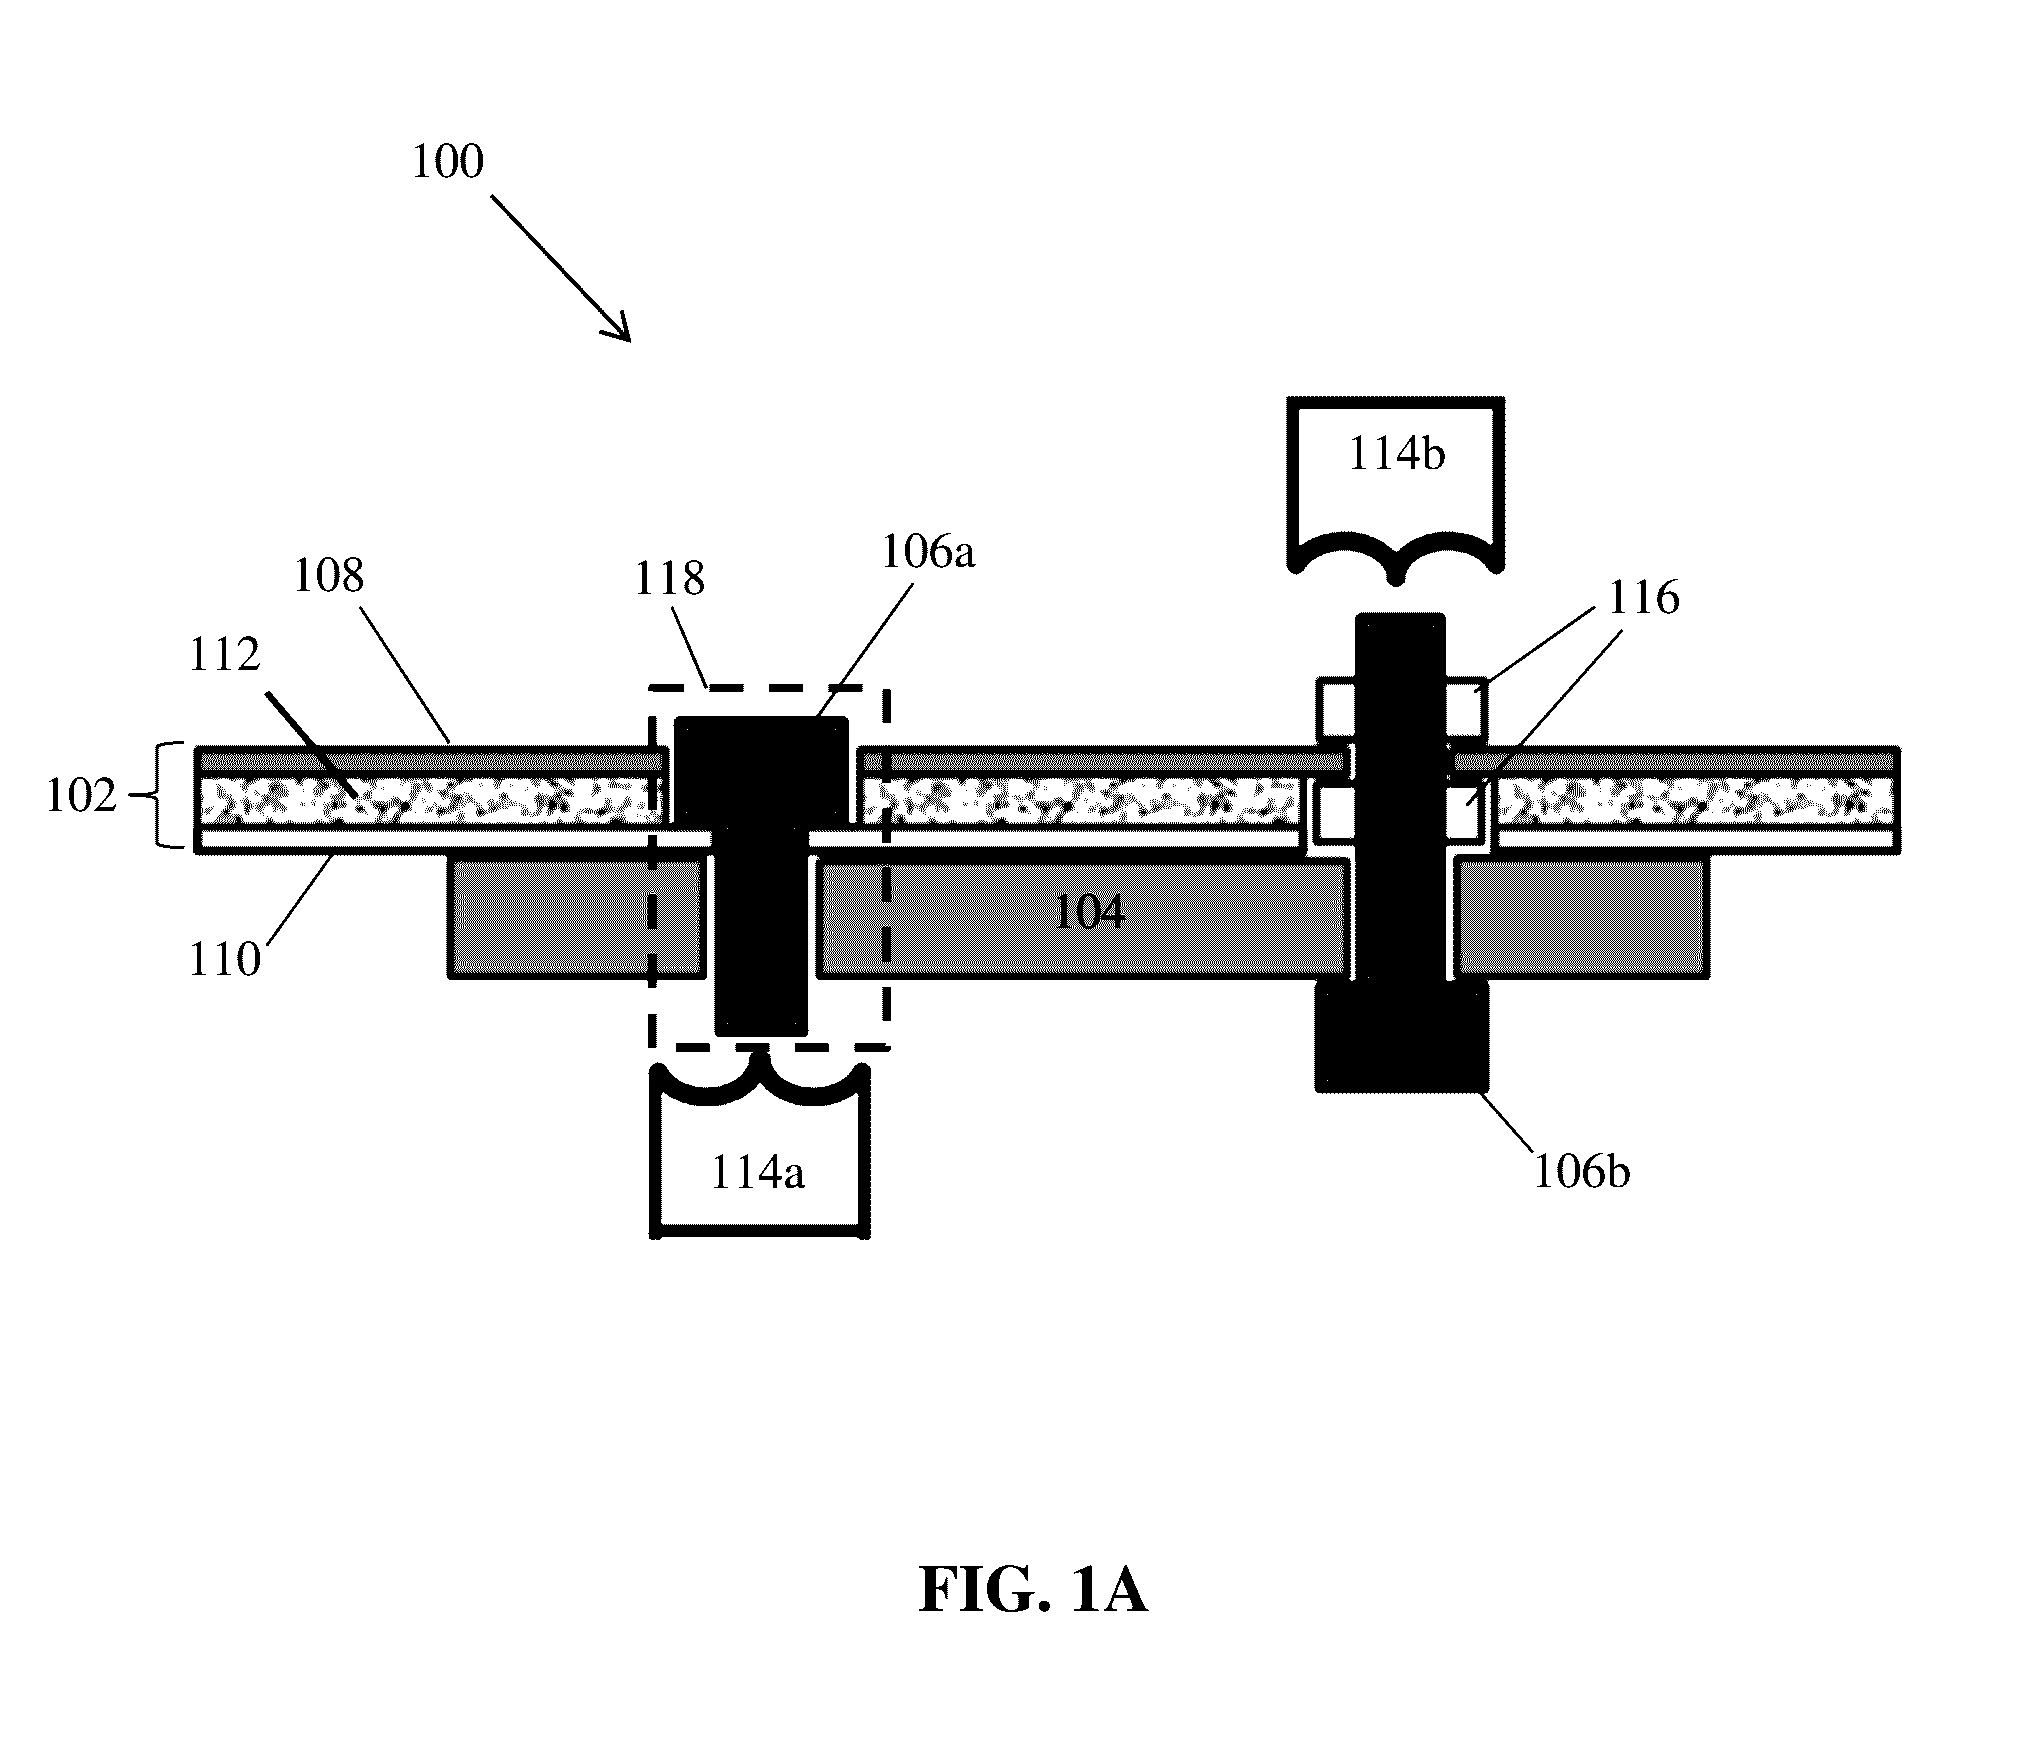 Method for mechnical and electrical connection to display electrodes